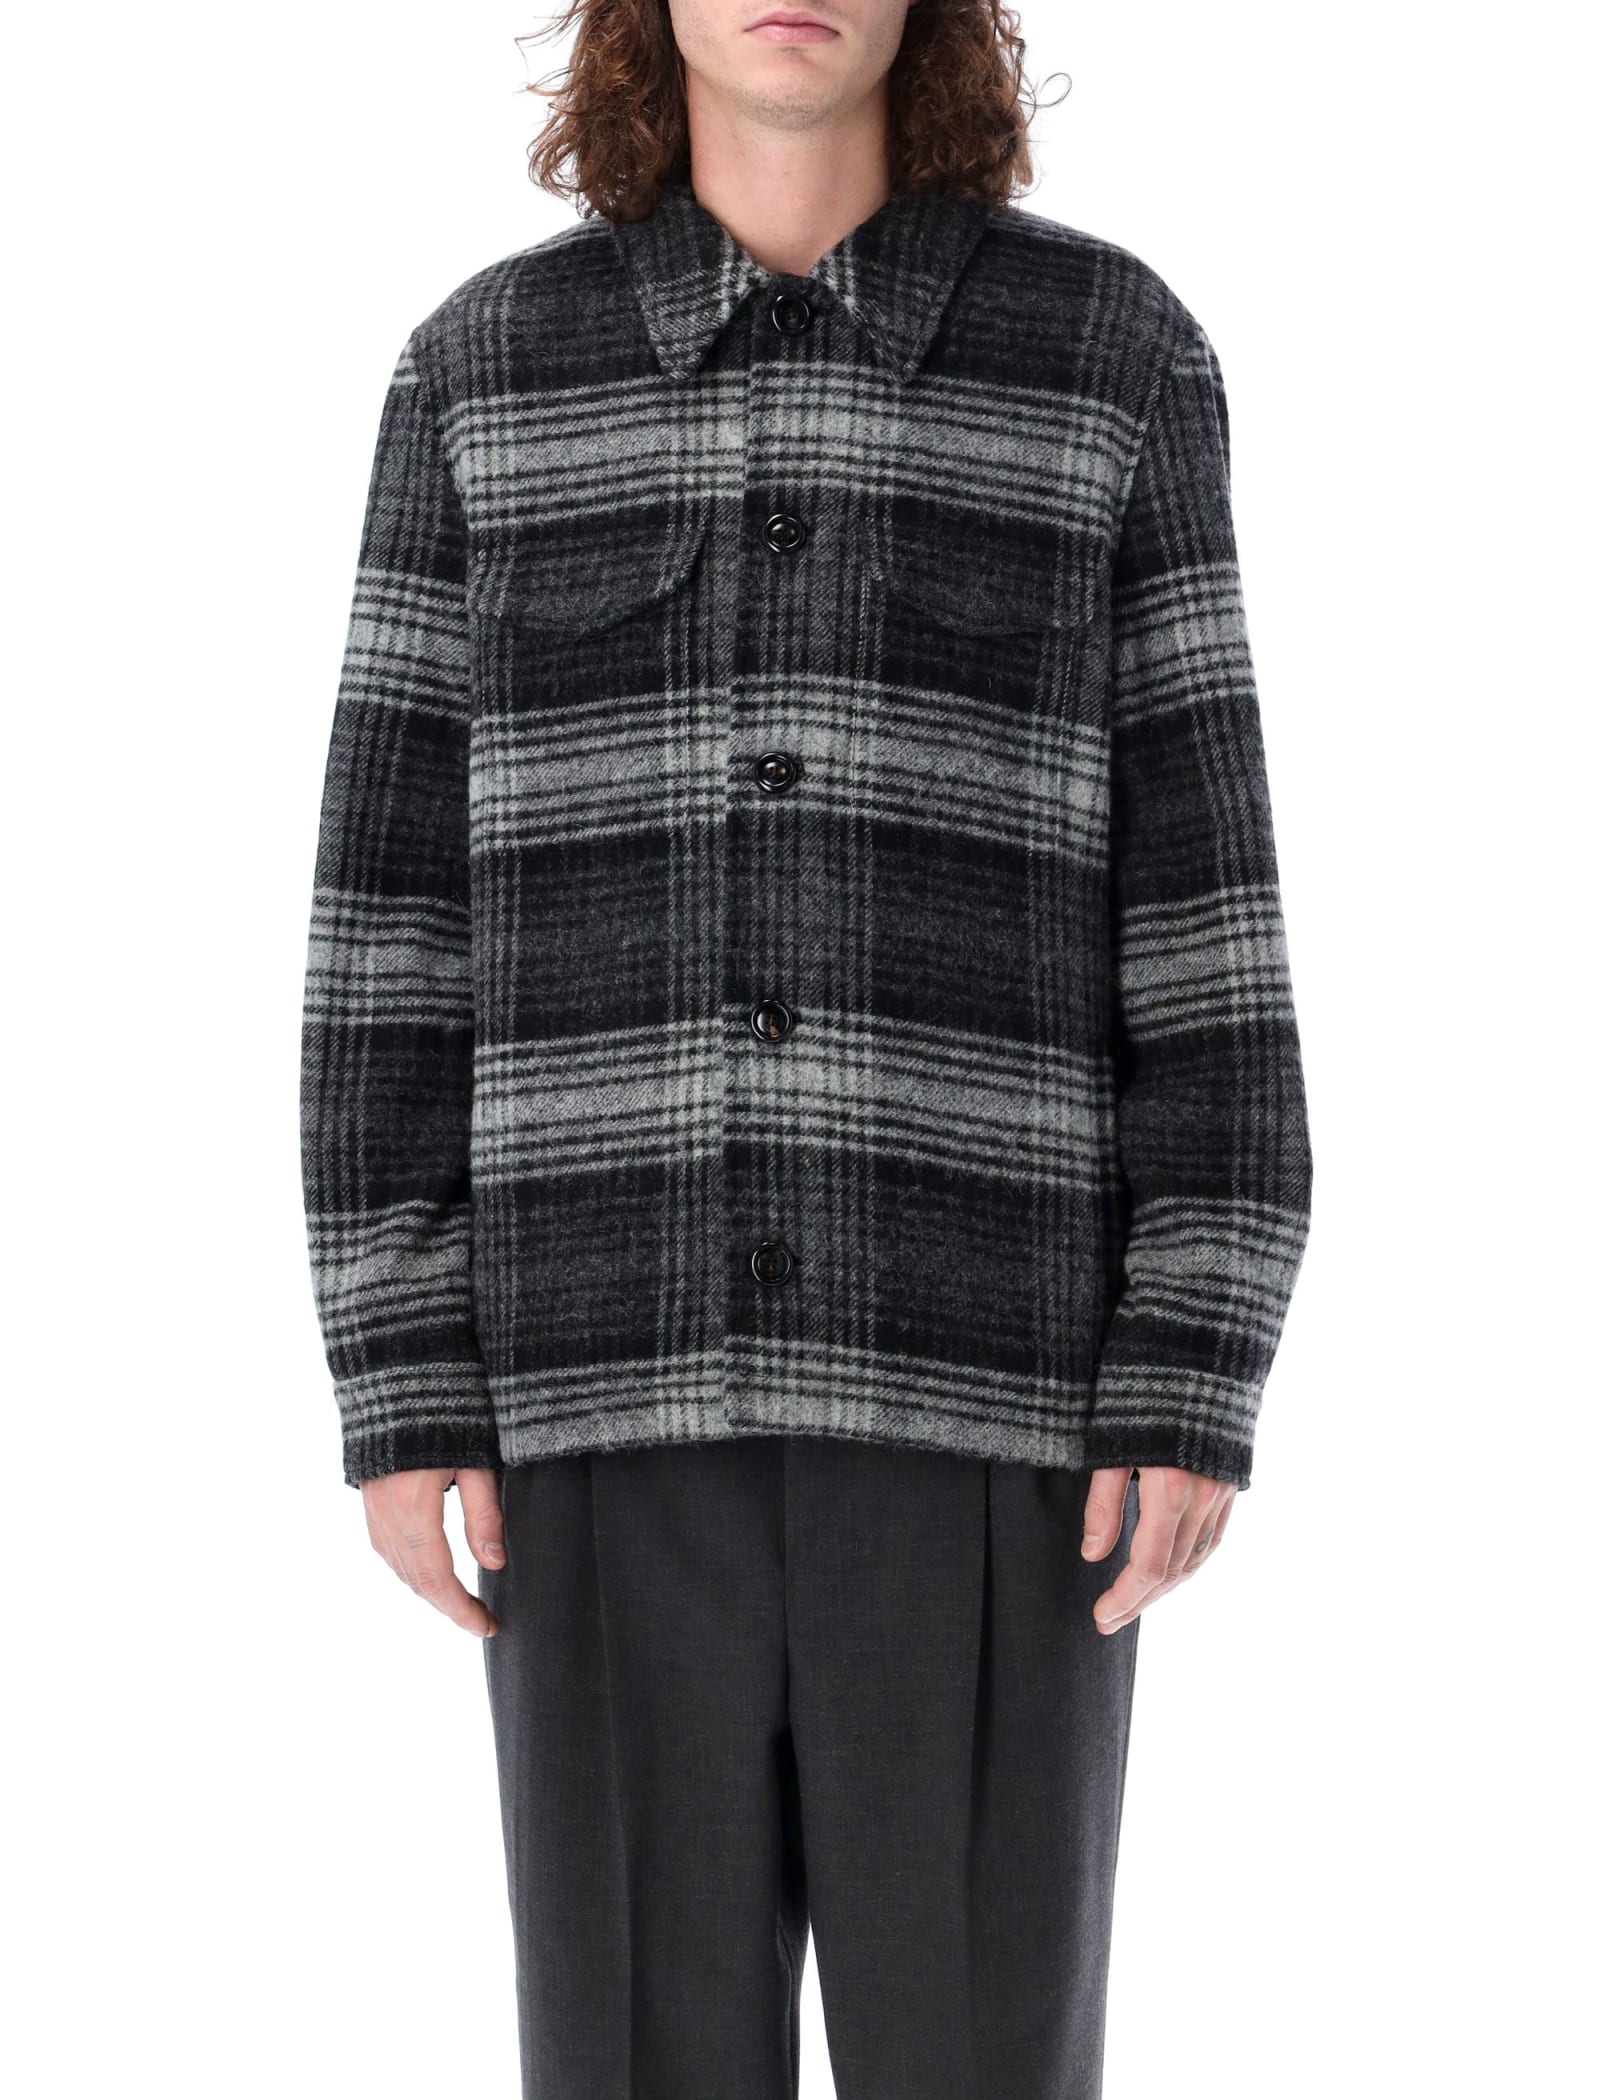 Ami Alexandre Mattiussi Buttoned Jacket In Check Felted Wool